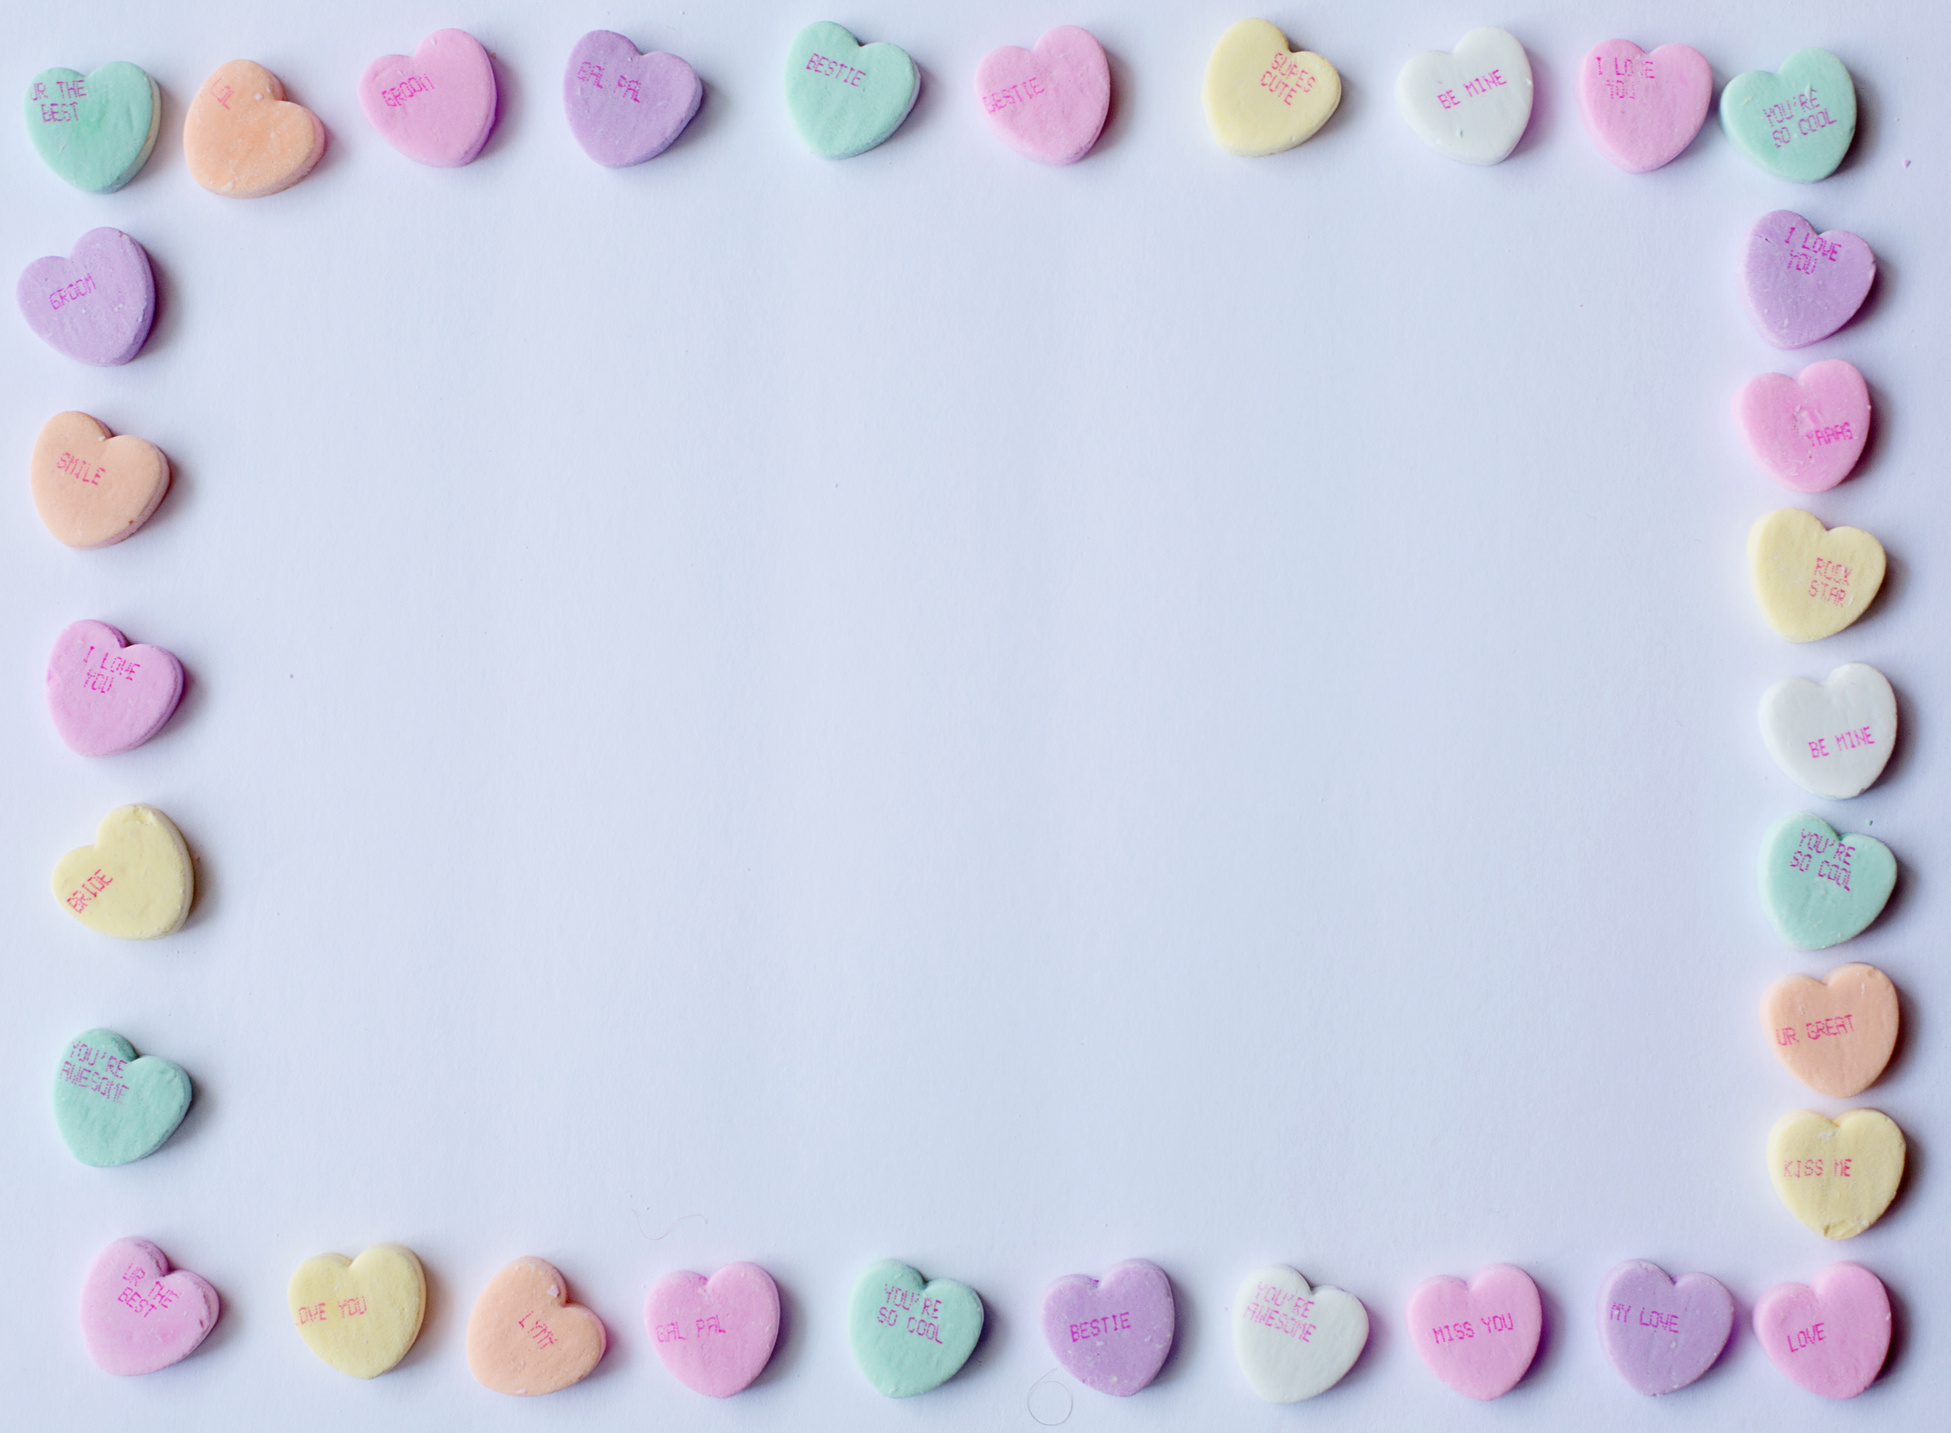 Pastel Colors of Heart Shaped Candies